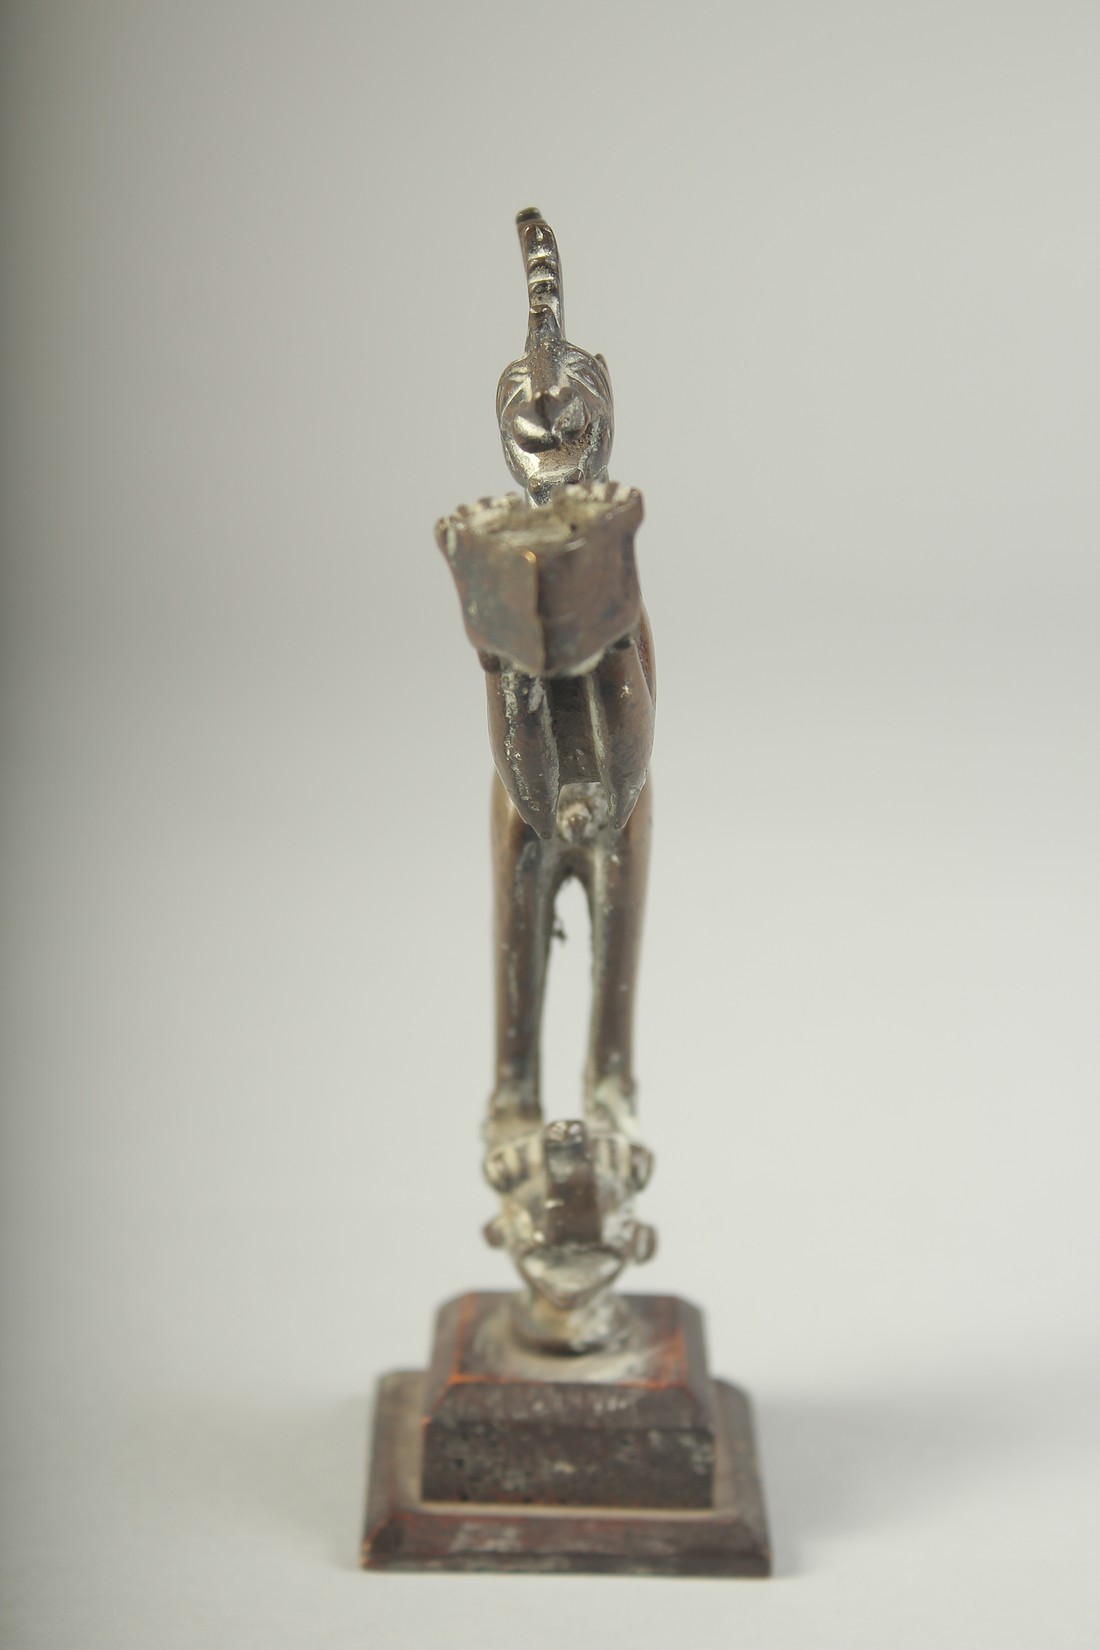 17TH-18TH CENTURY SOUTH INDIAN BRONZE FIGURE OF YALI, mounted to a wooden base, 14cm high. - Image 2 of 5